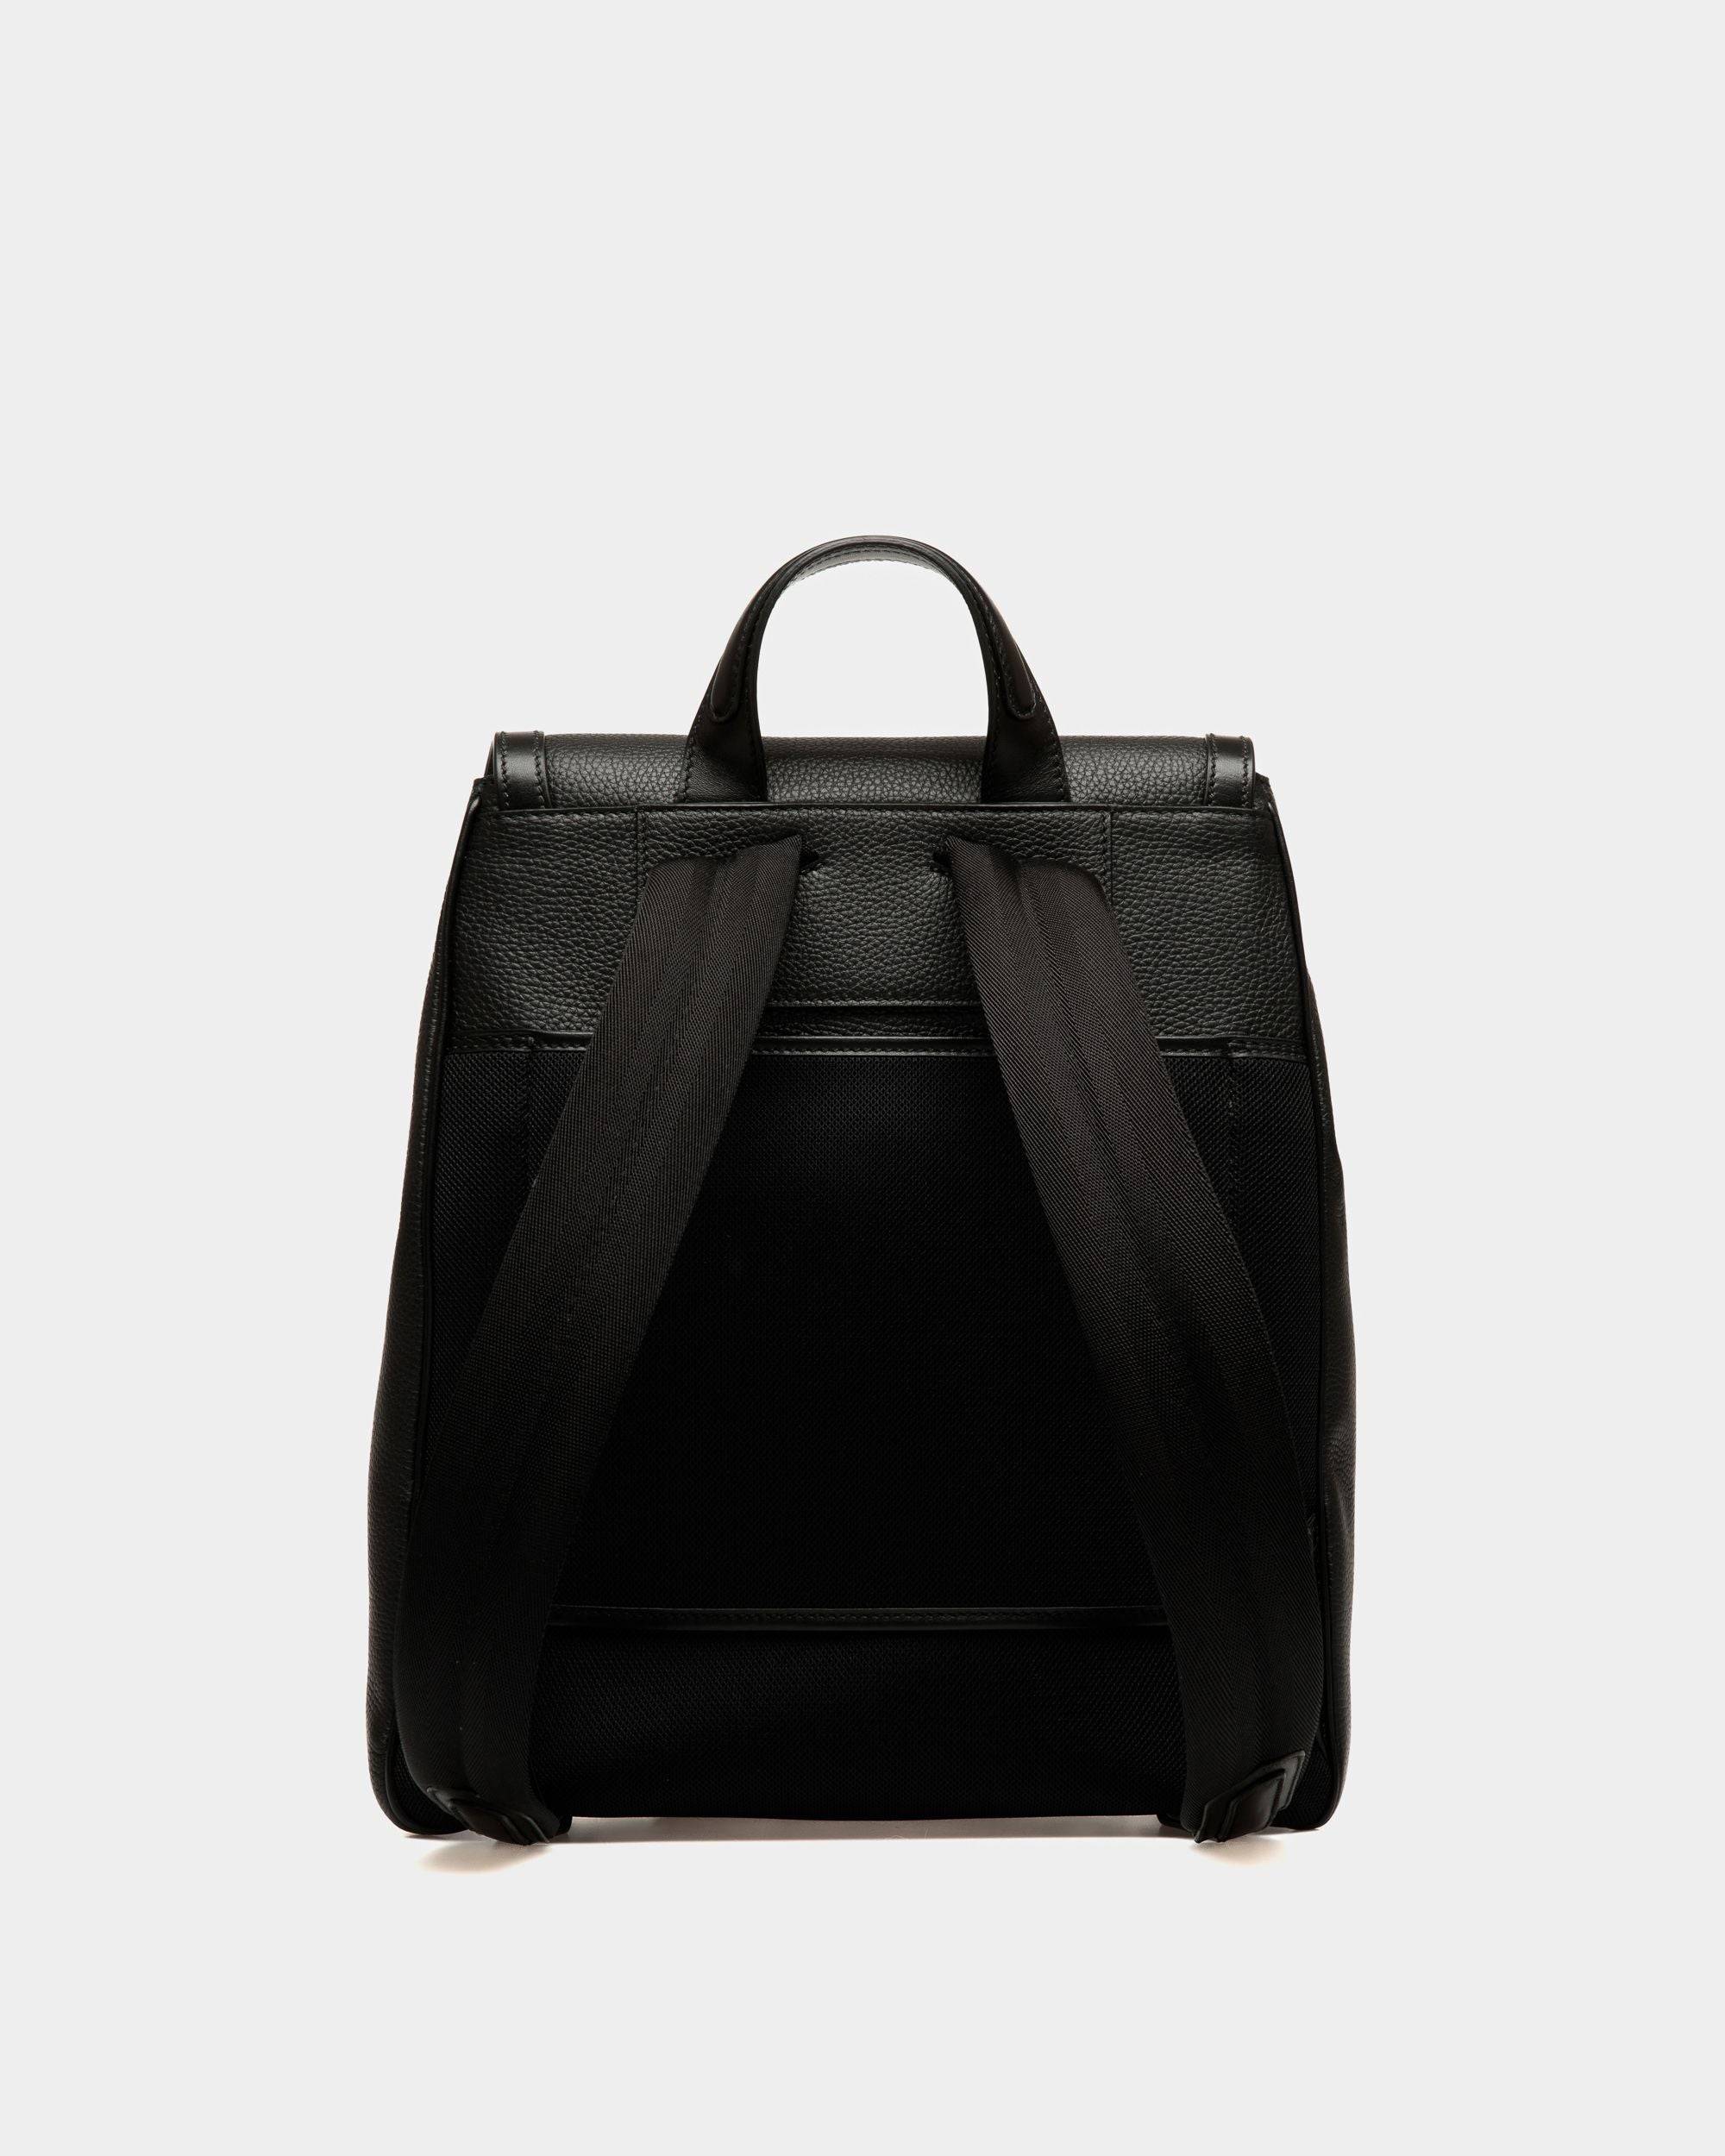 Spin | Men's Backpack in Black Grained Leather | Bally | Still Life Back